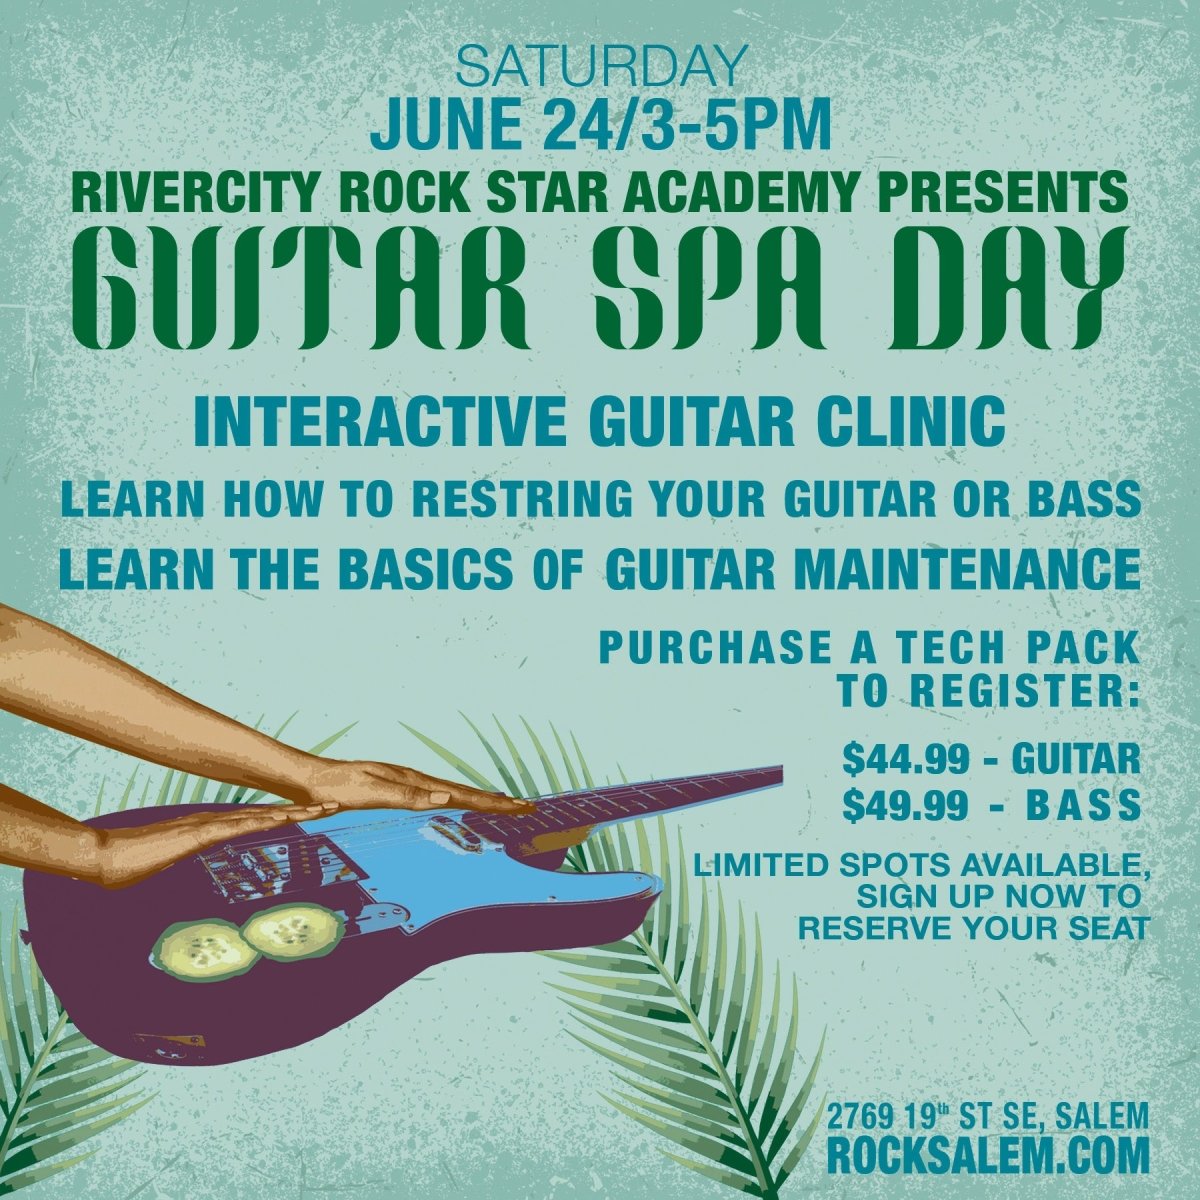 Guitar Spa Day Interactive Clinic on June 24th - RiverCity Rock Star Academy Music Store